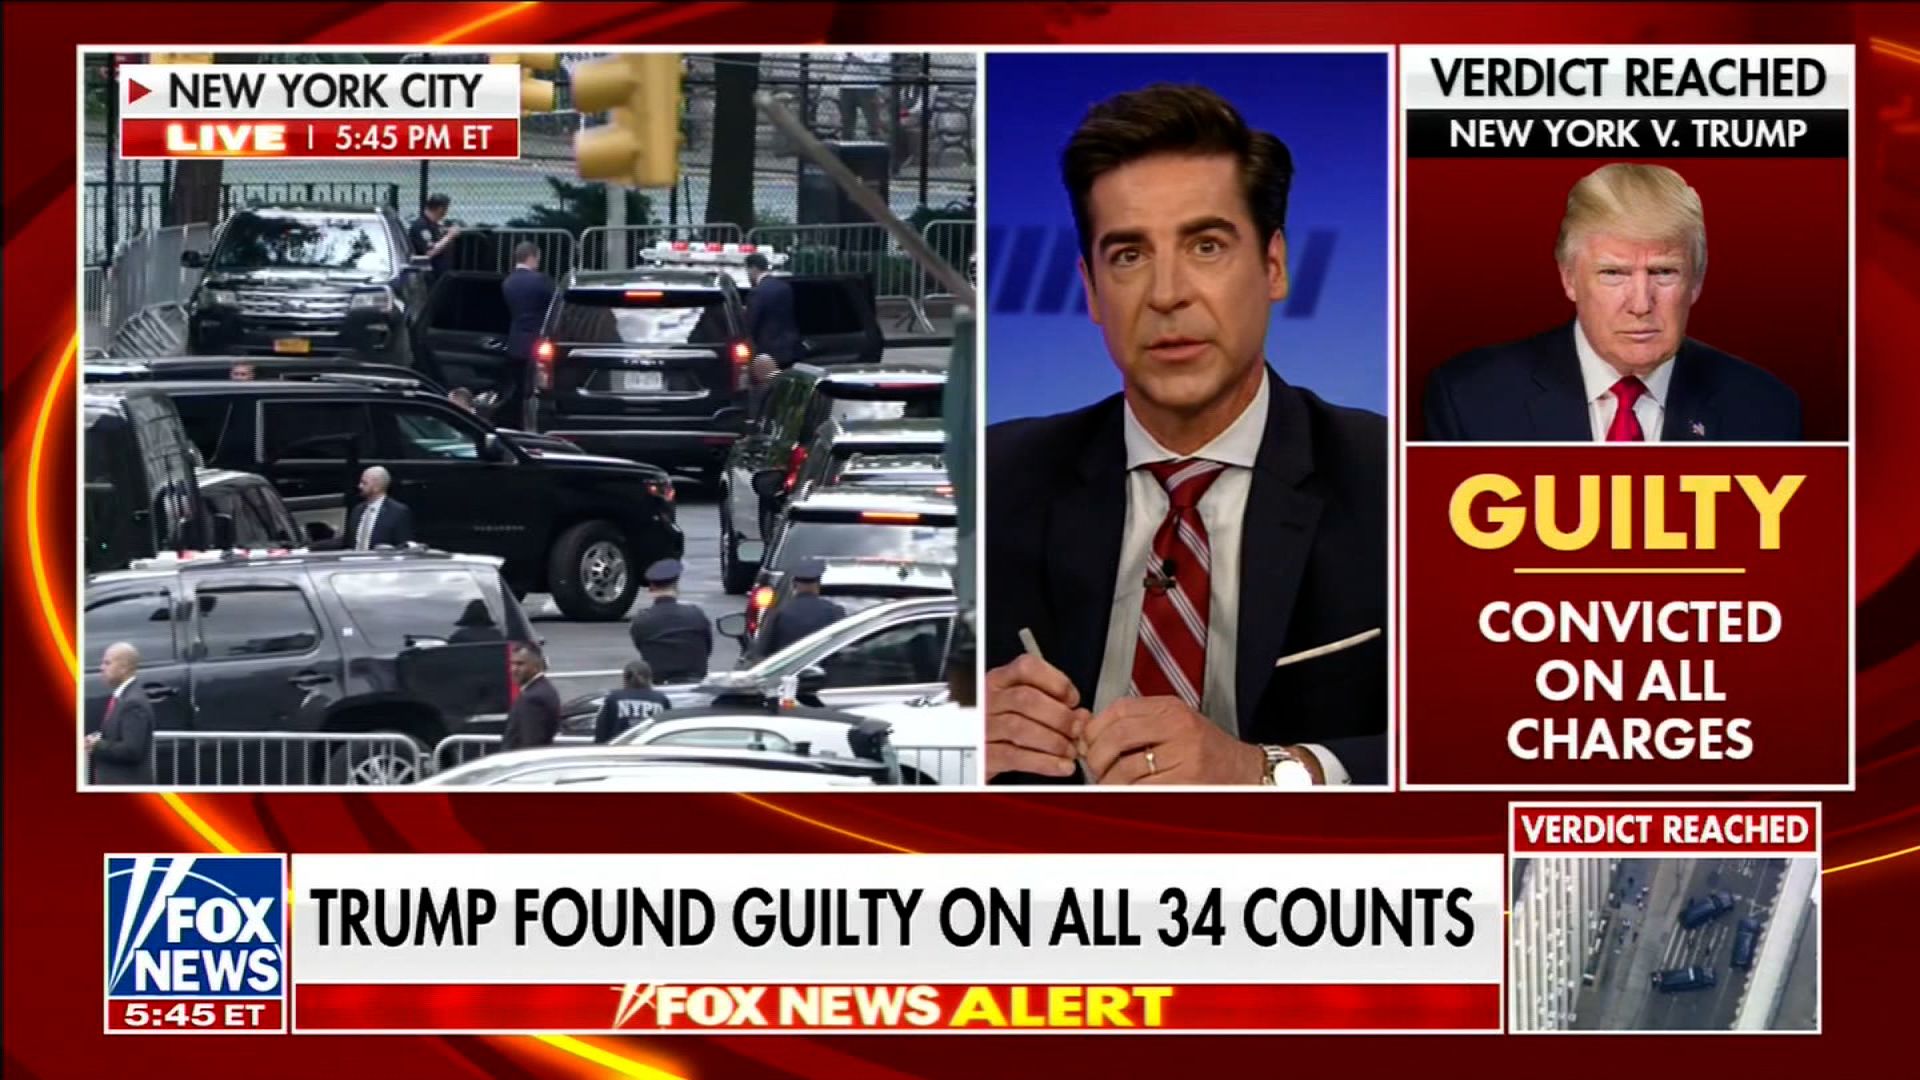 See how Fox News covered Trump's guilty verdict